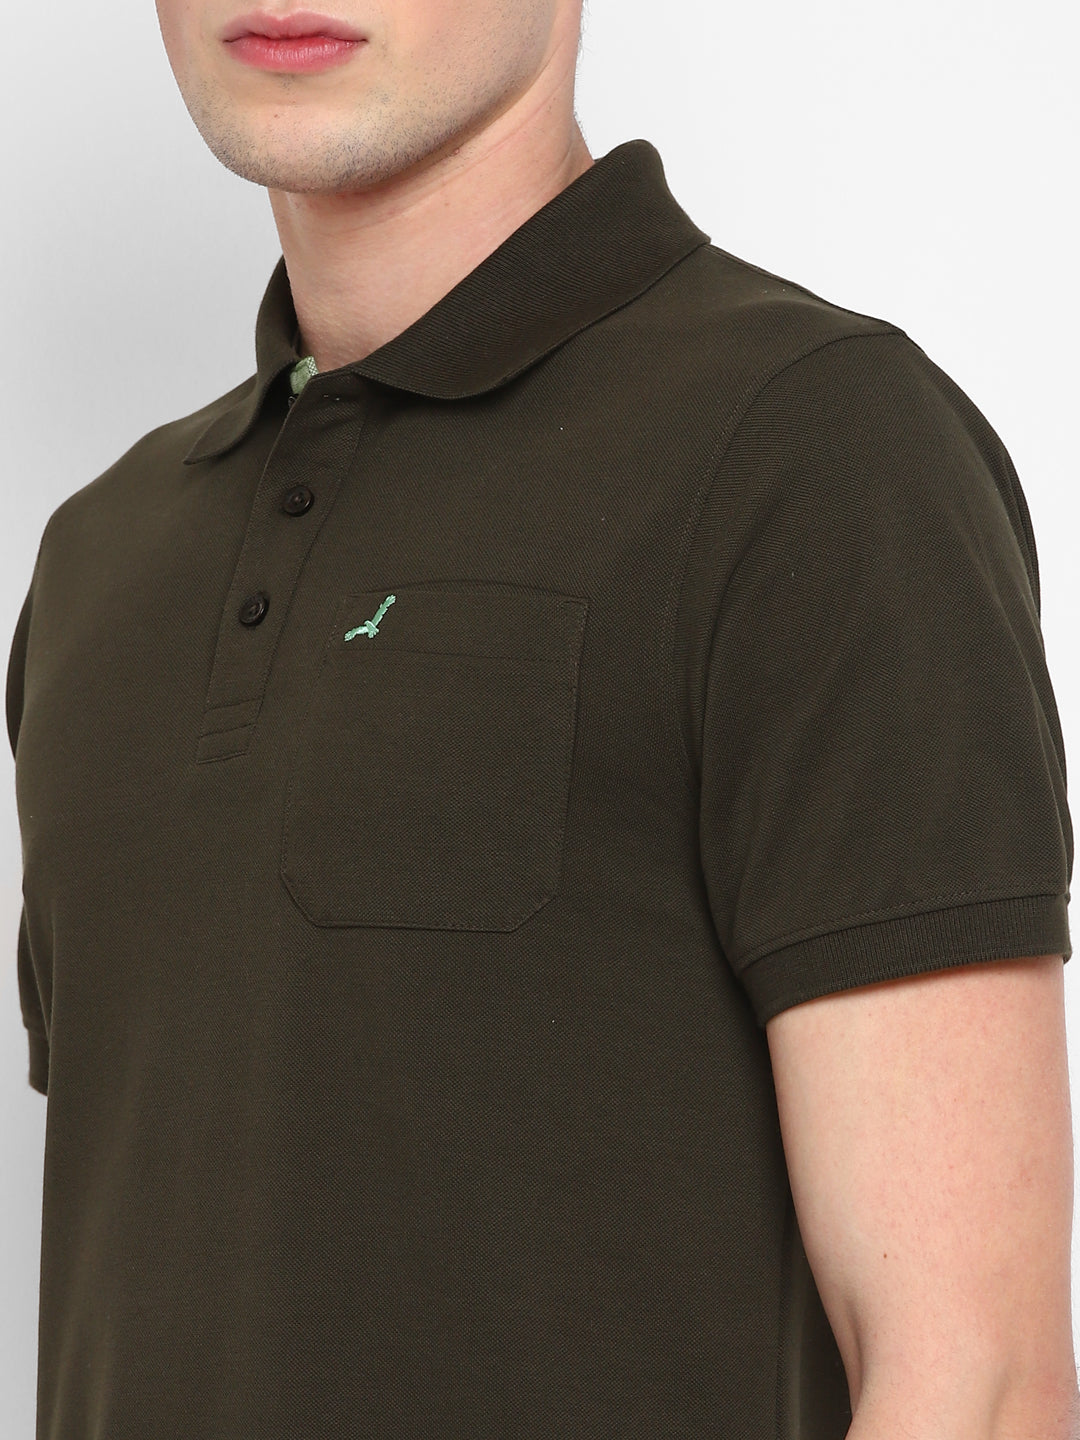 Polo T-Shirt For Men with Pocket with No.3 Applique - Olive